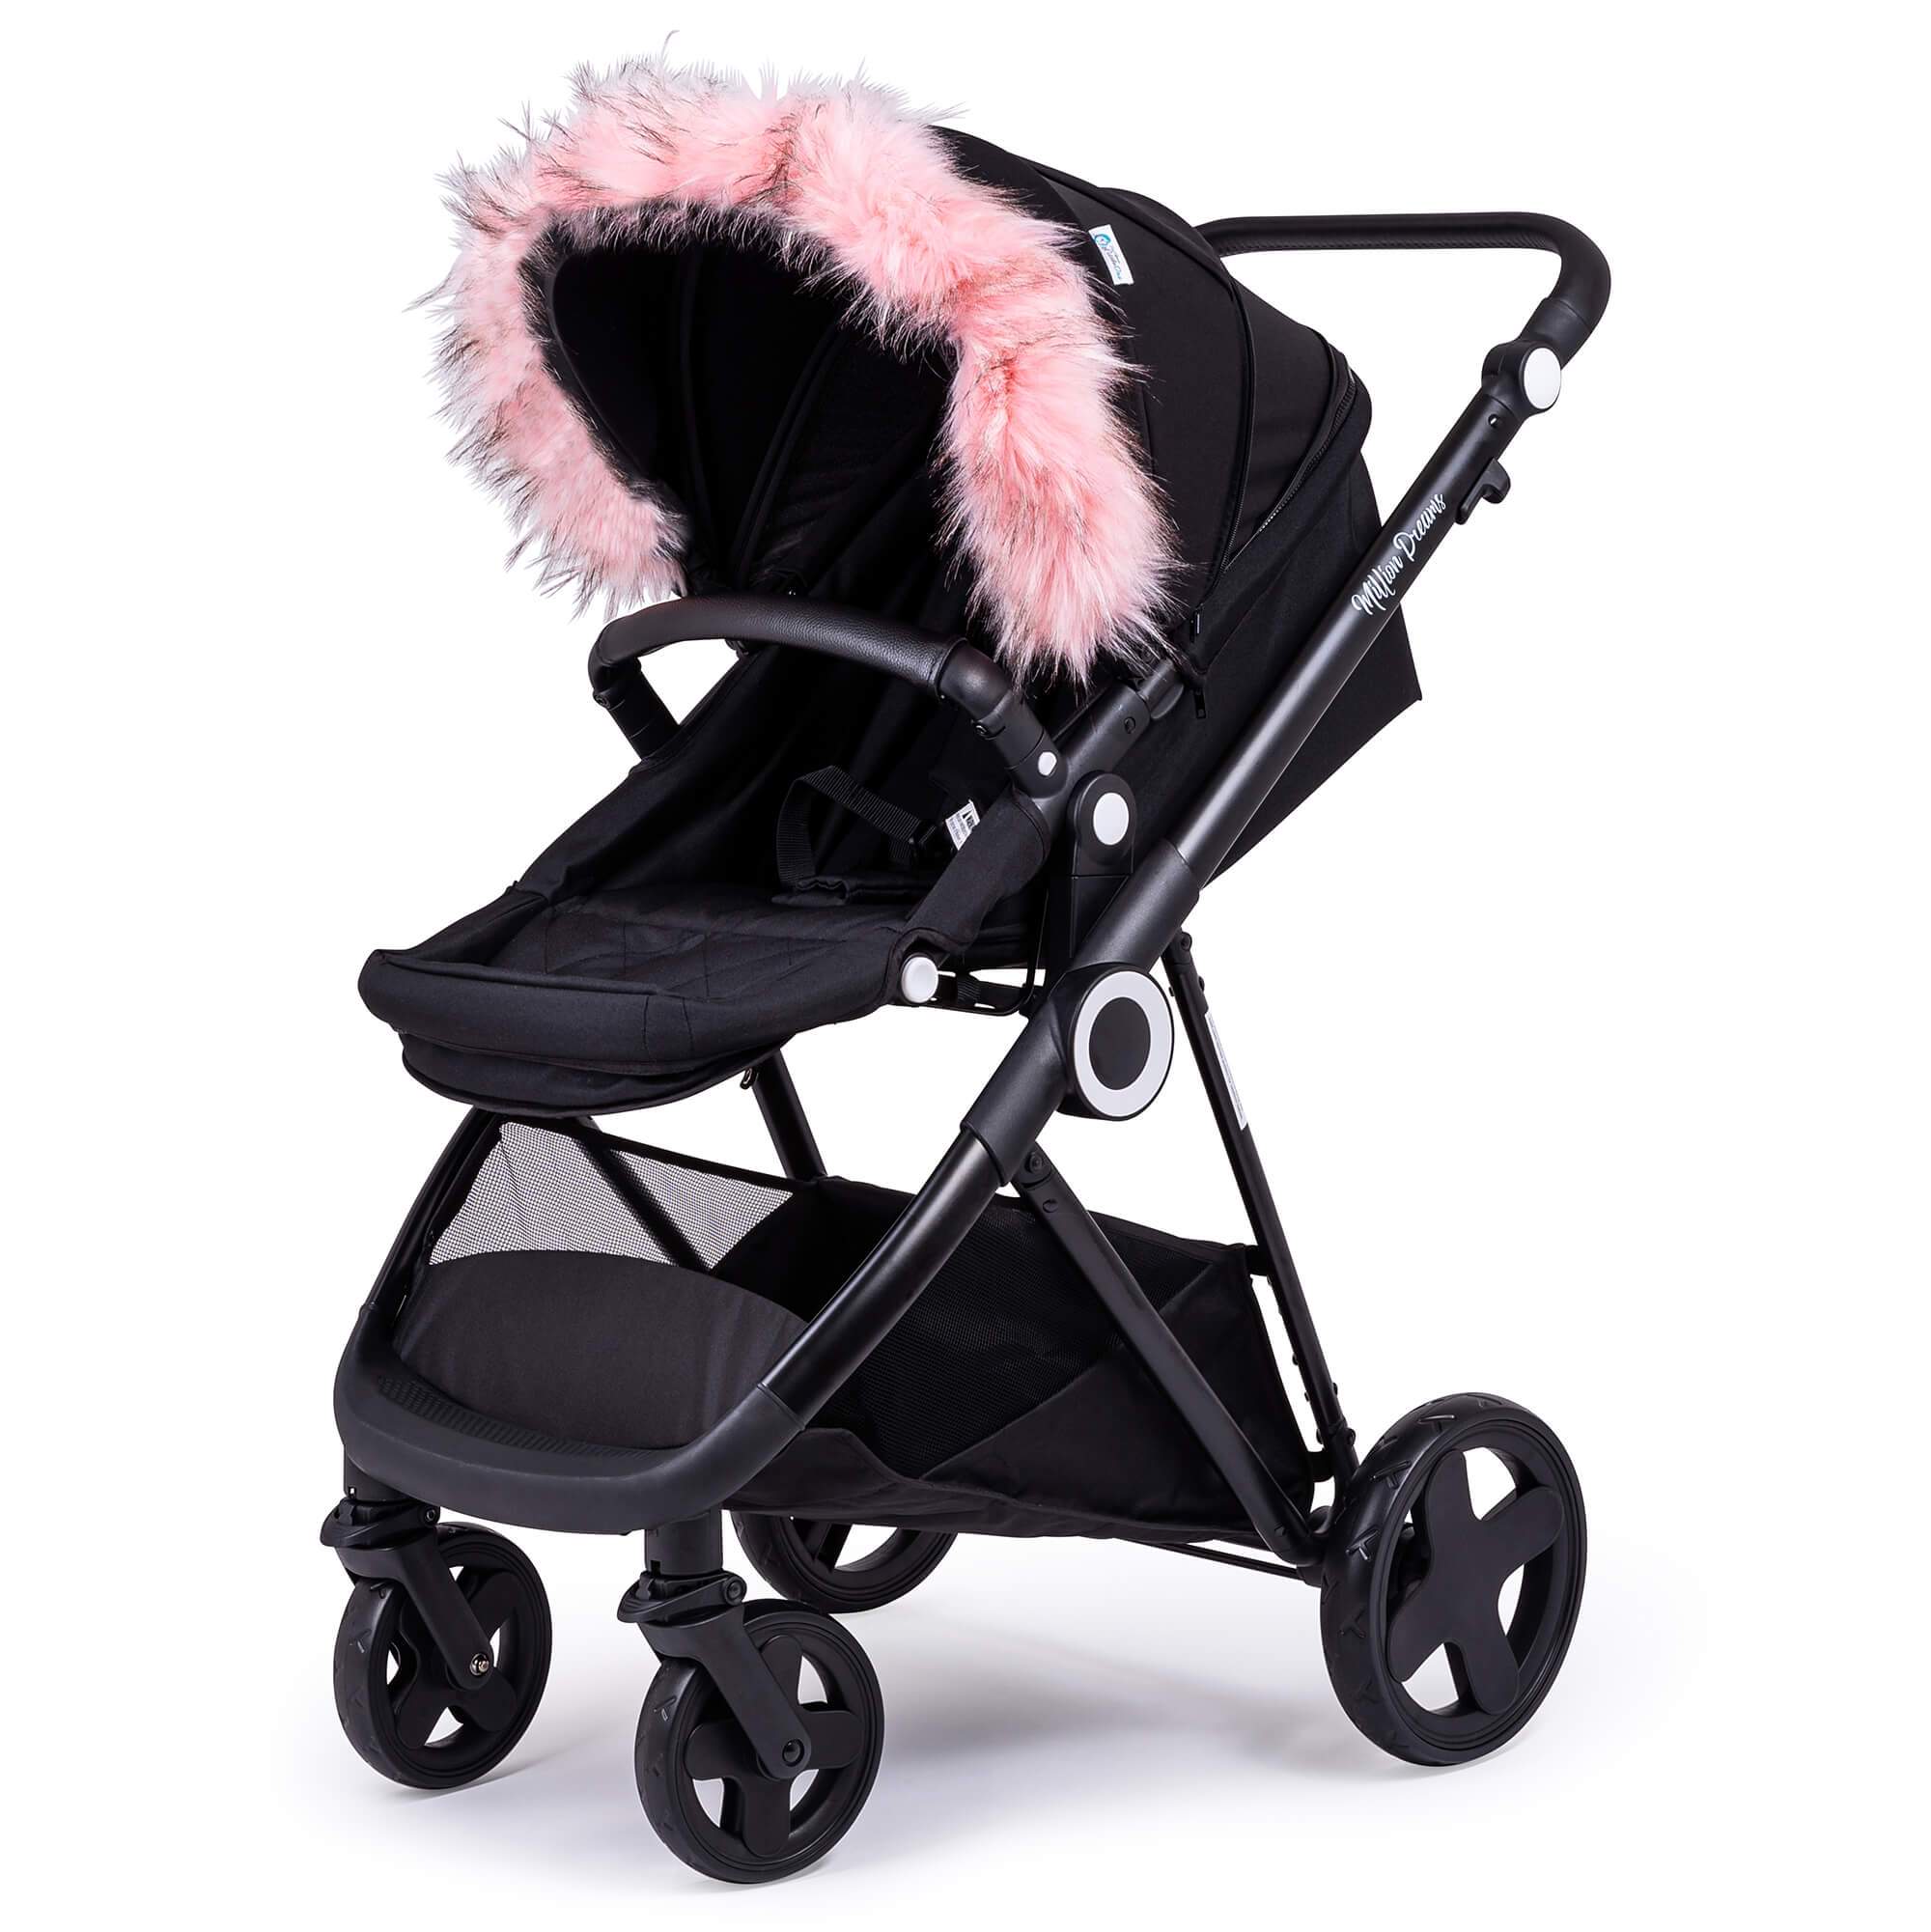 Pram Fur Hood Trim Attachment for Pushchair Compatible with BOB - Light Pink / Fits All Models | For Your Little One